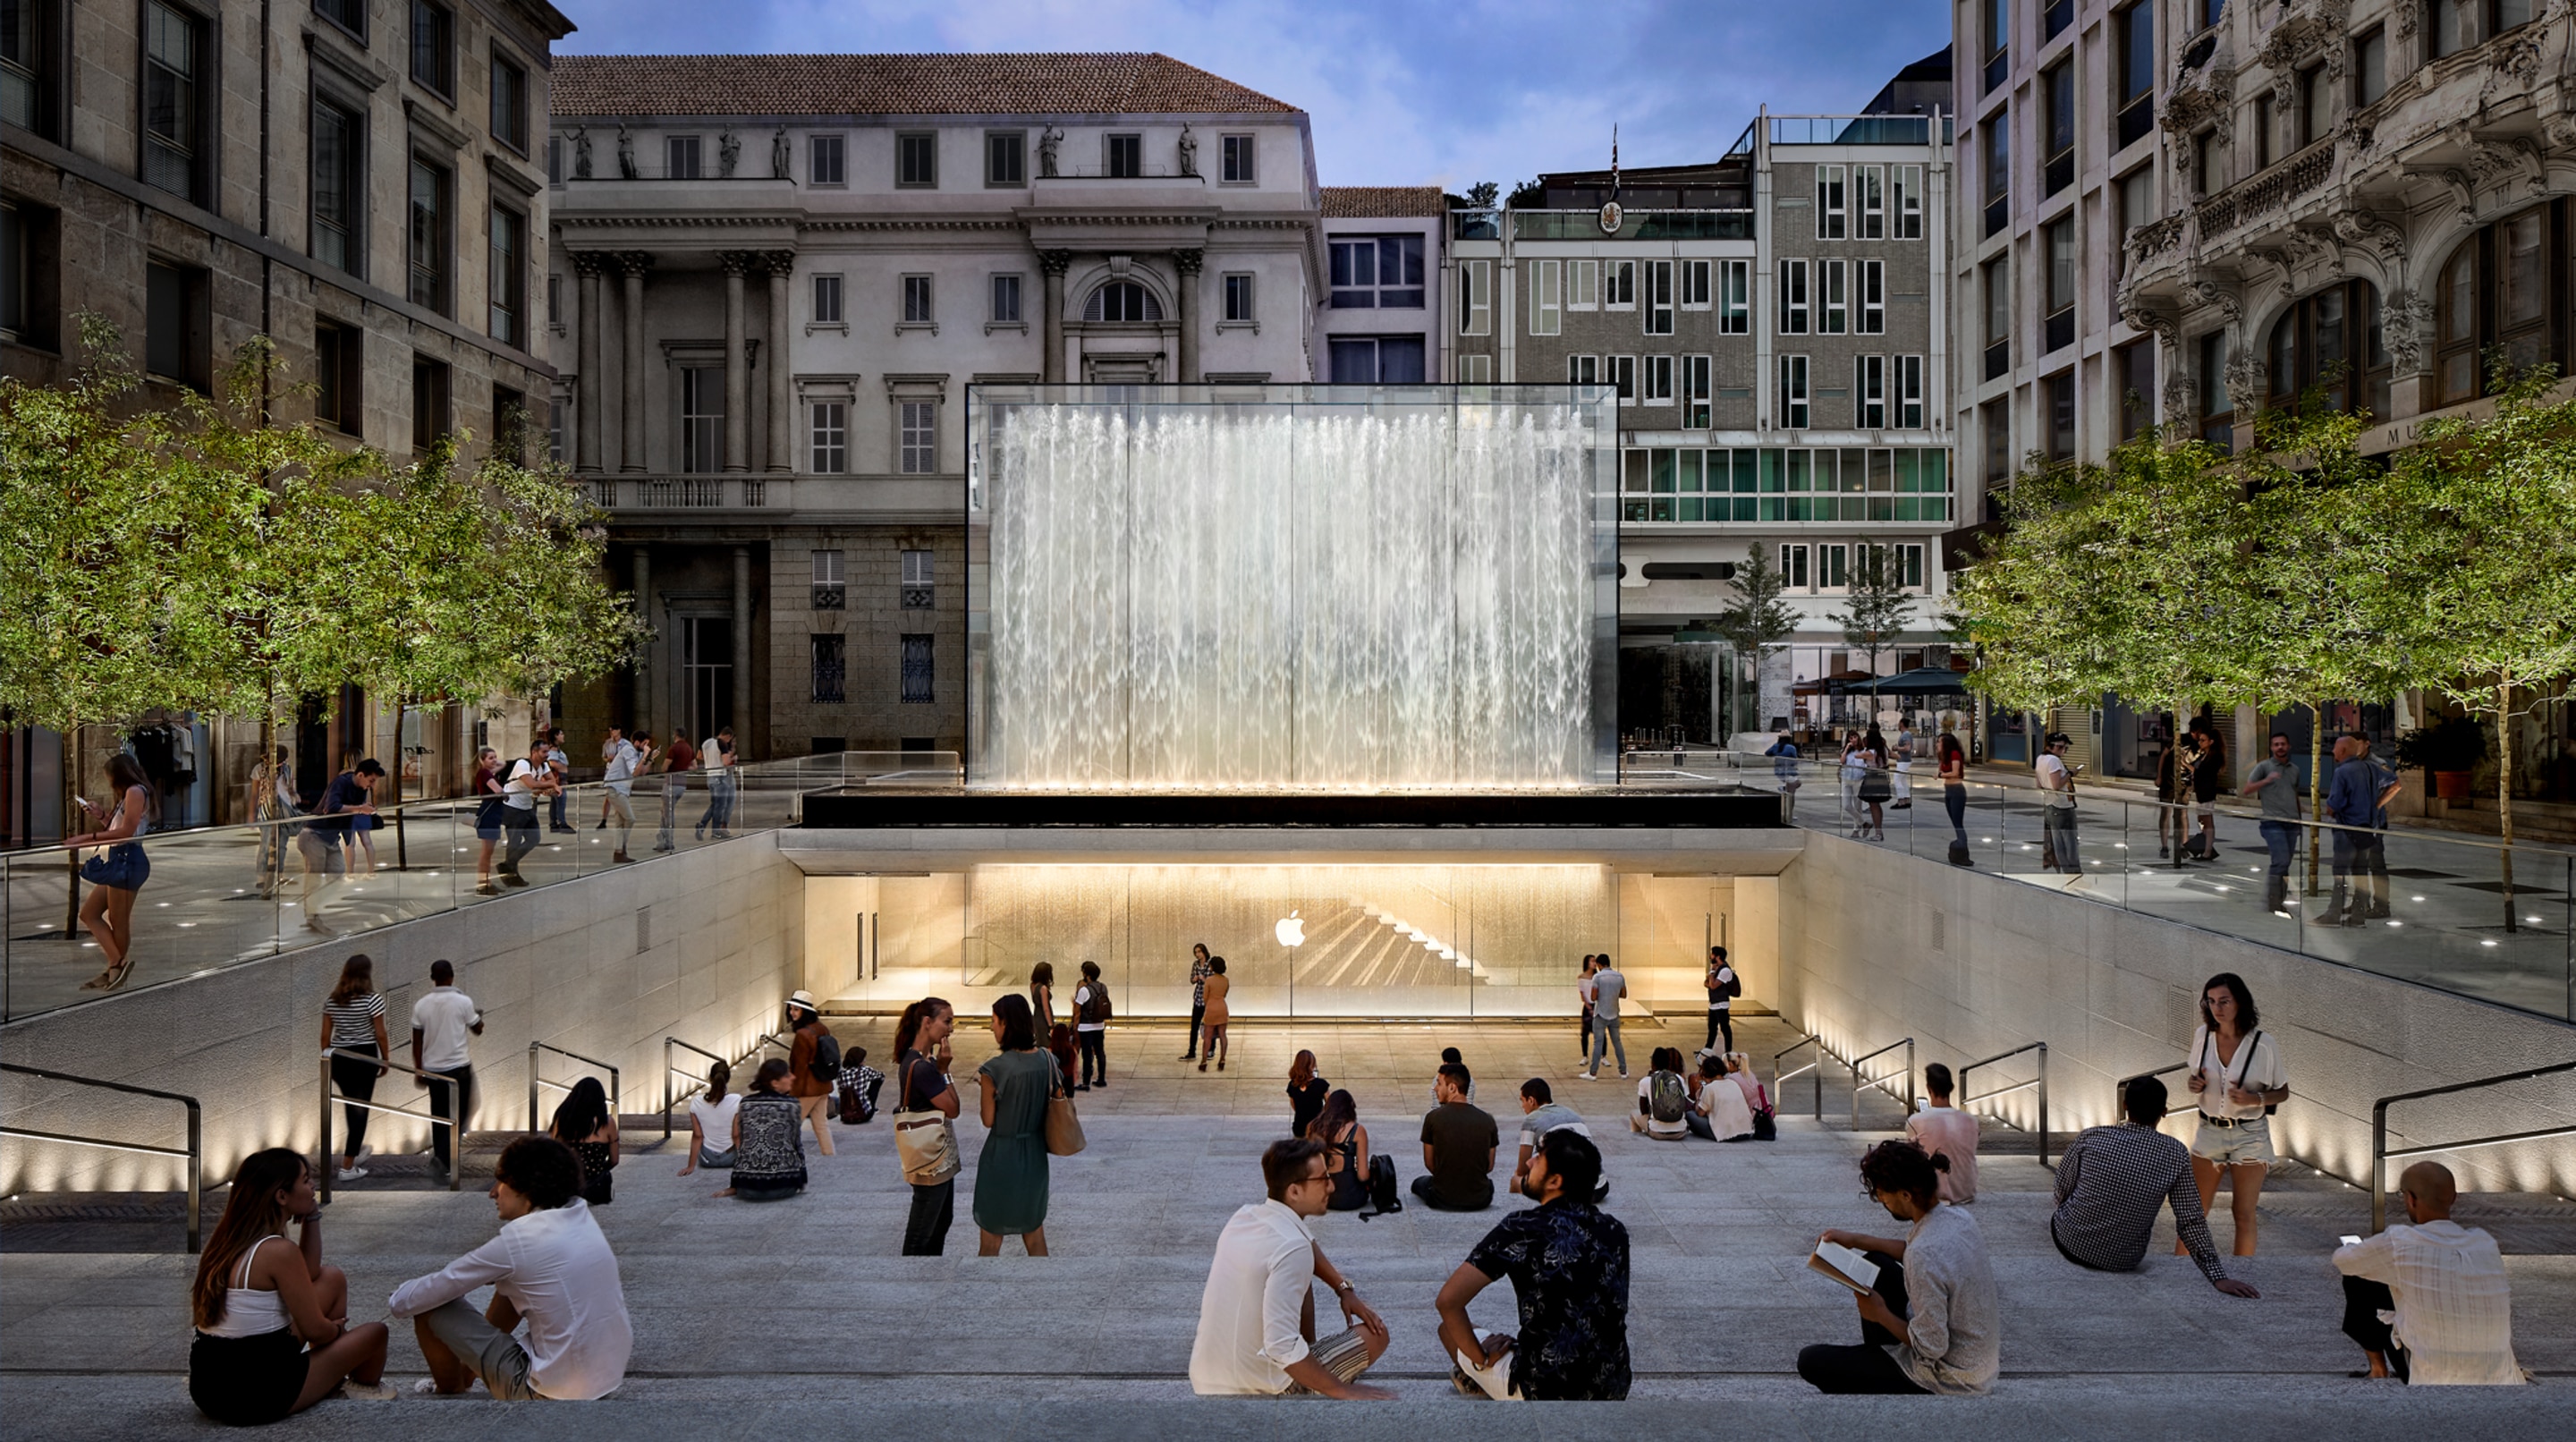 Apple Piazza Liberty in Milan, Italy